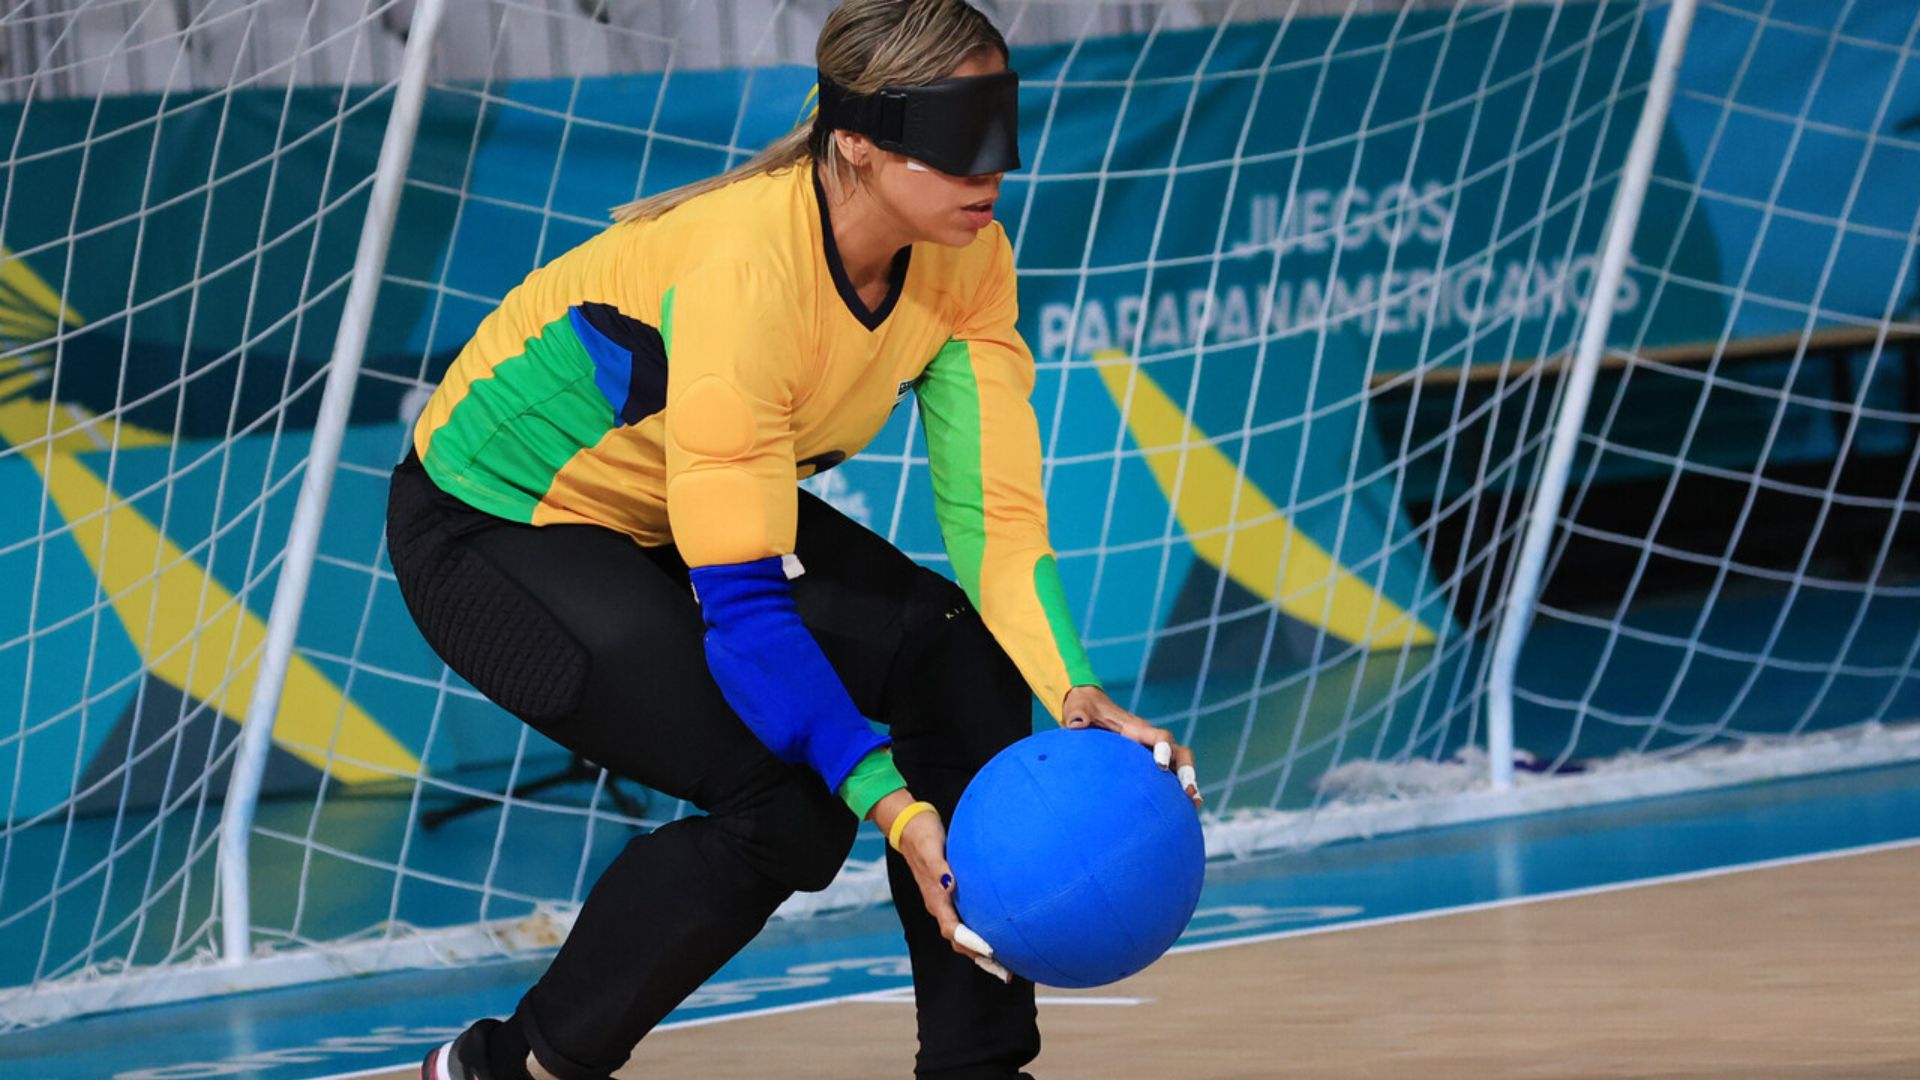 Brazil Defeats Peru and is already in the Female Goalball Semifinals